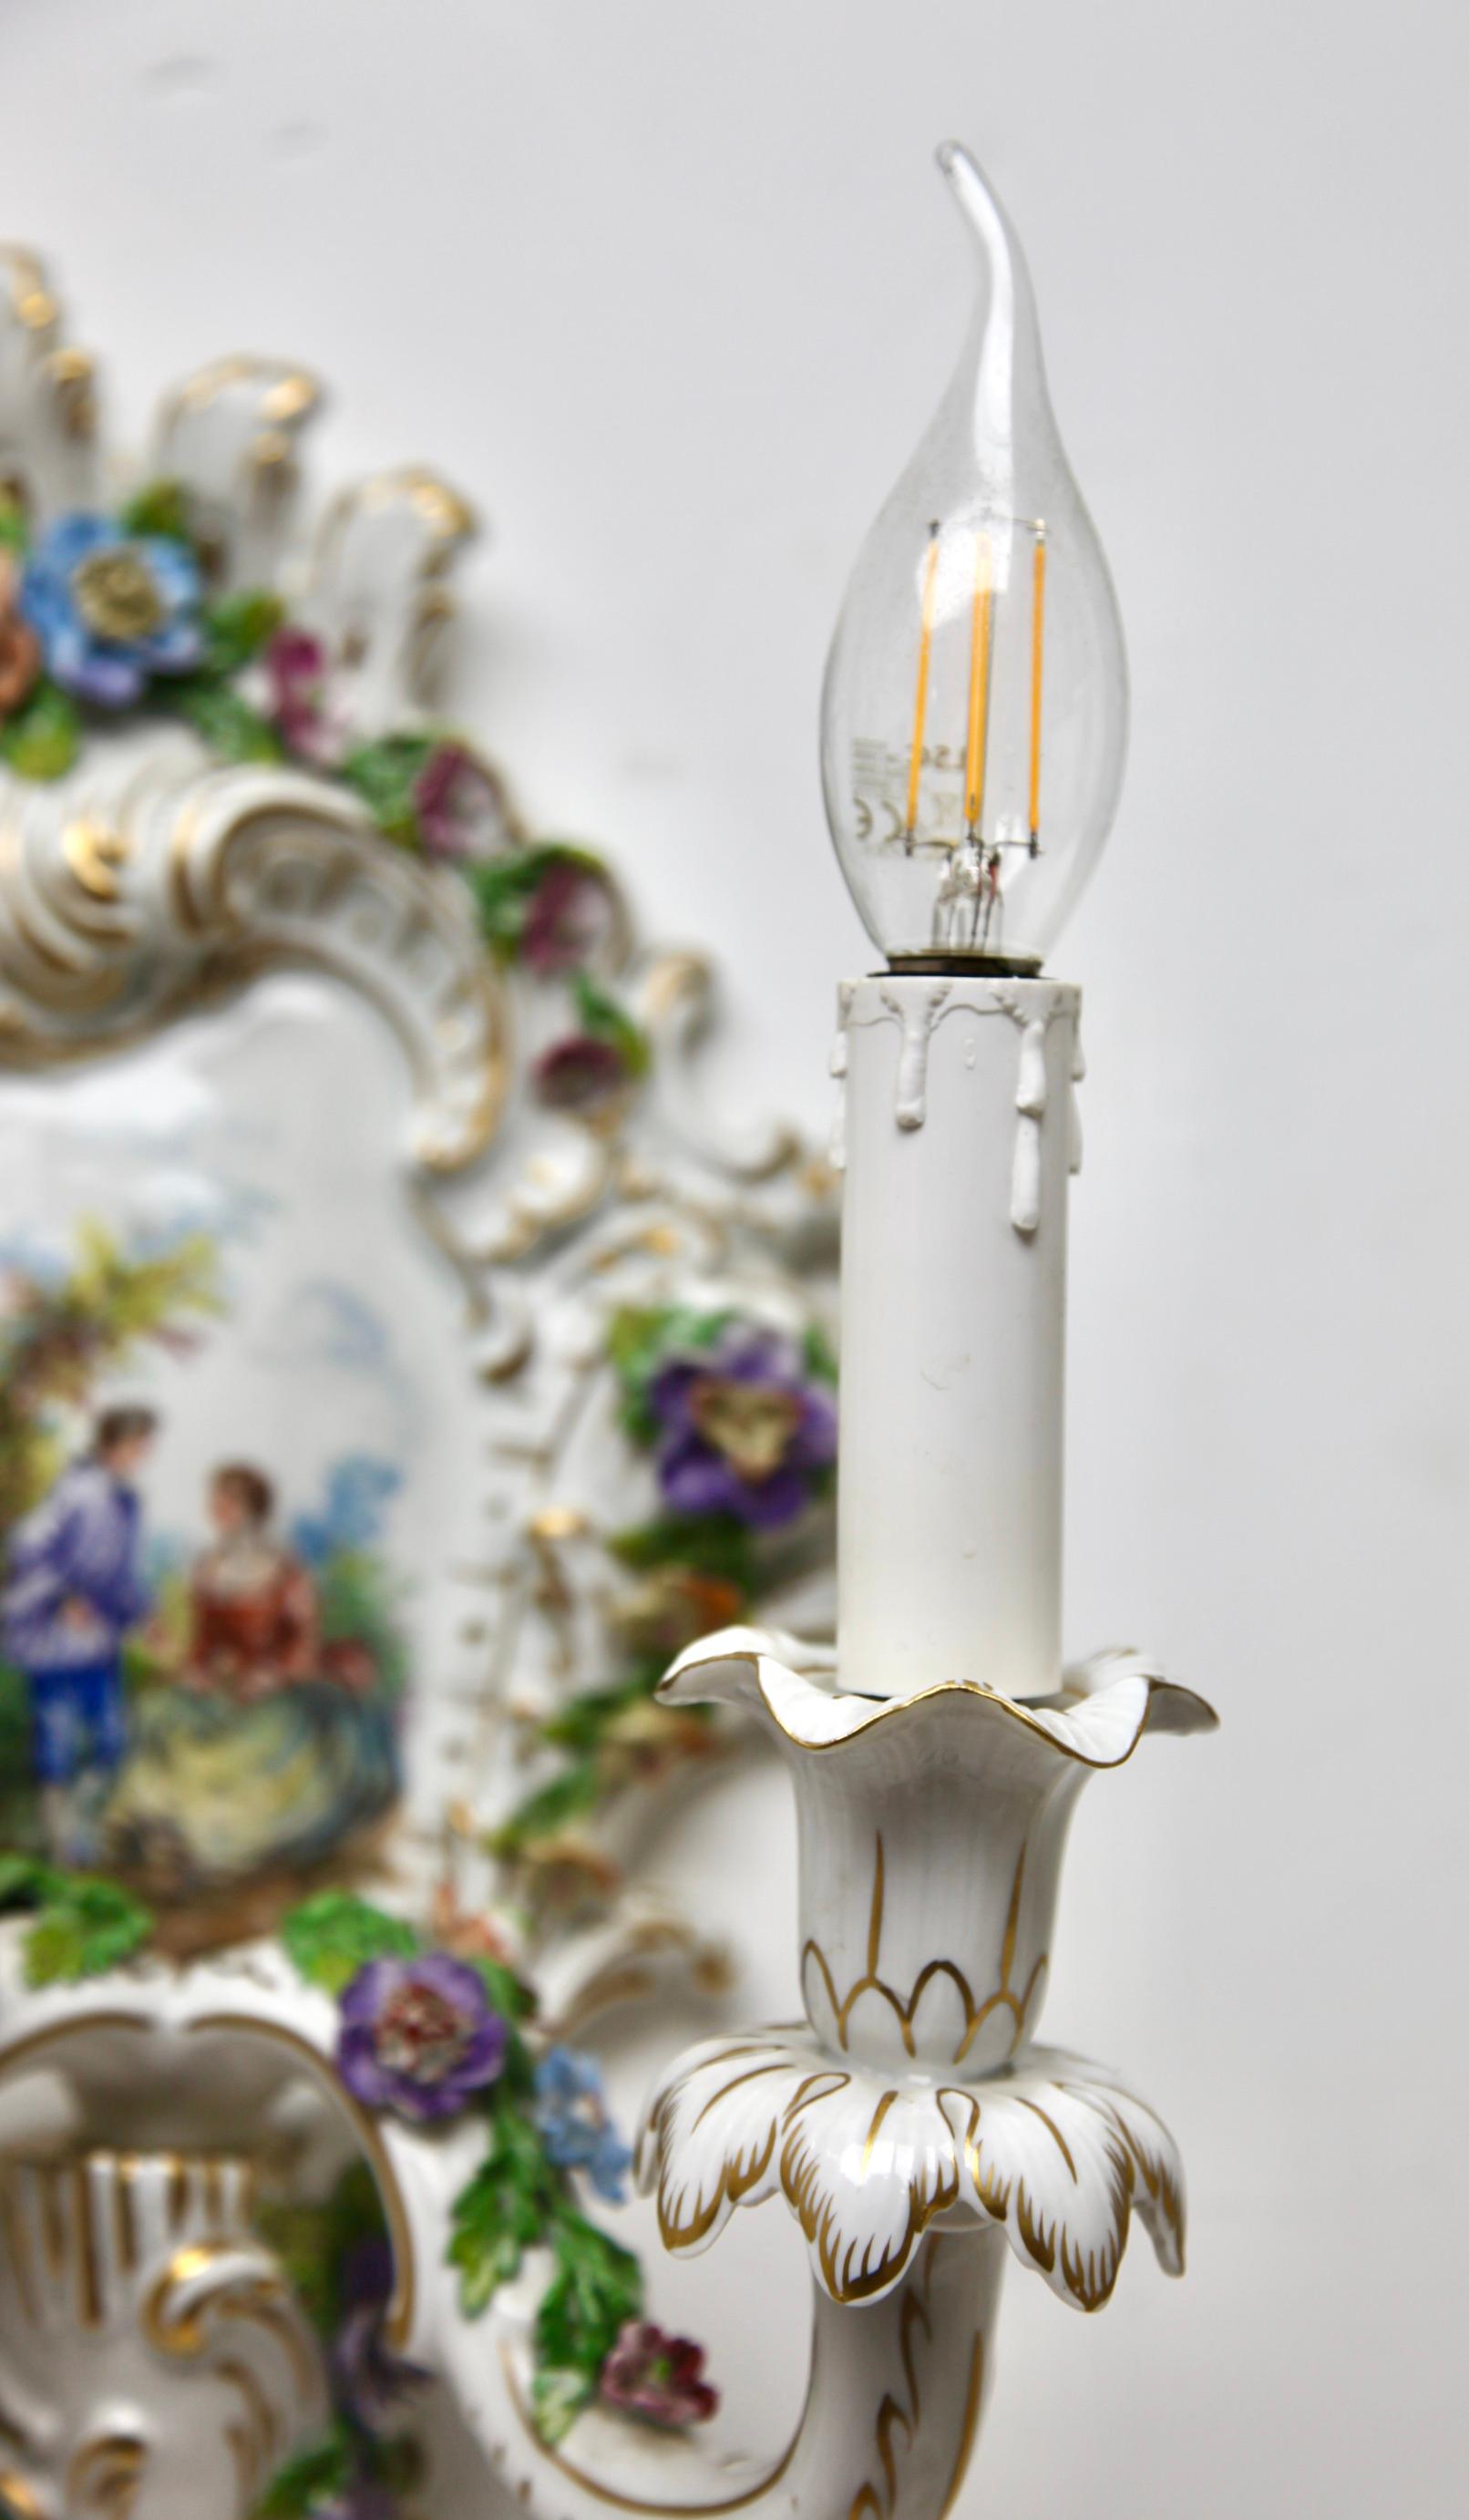 Mid-20th Century Porselain Pair Italian Sconces Hand-Crafted and Painted with floral decoration  For Sale